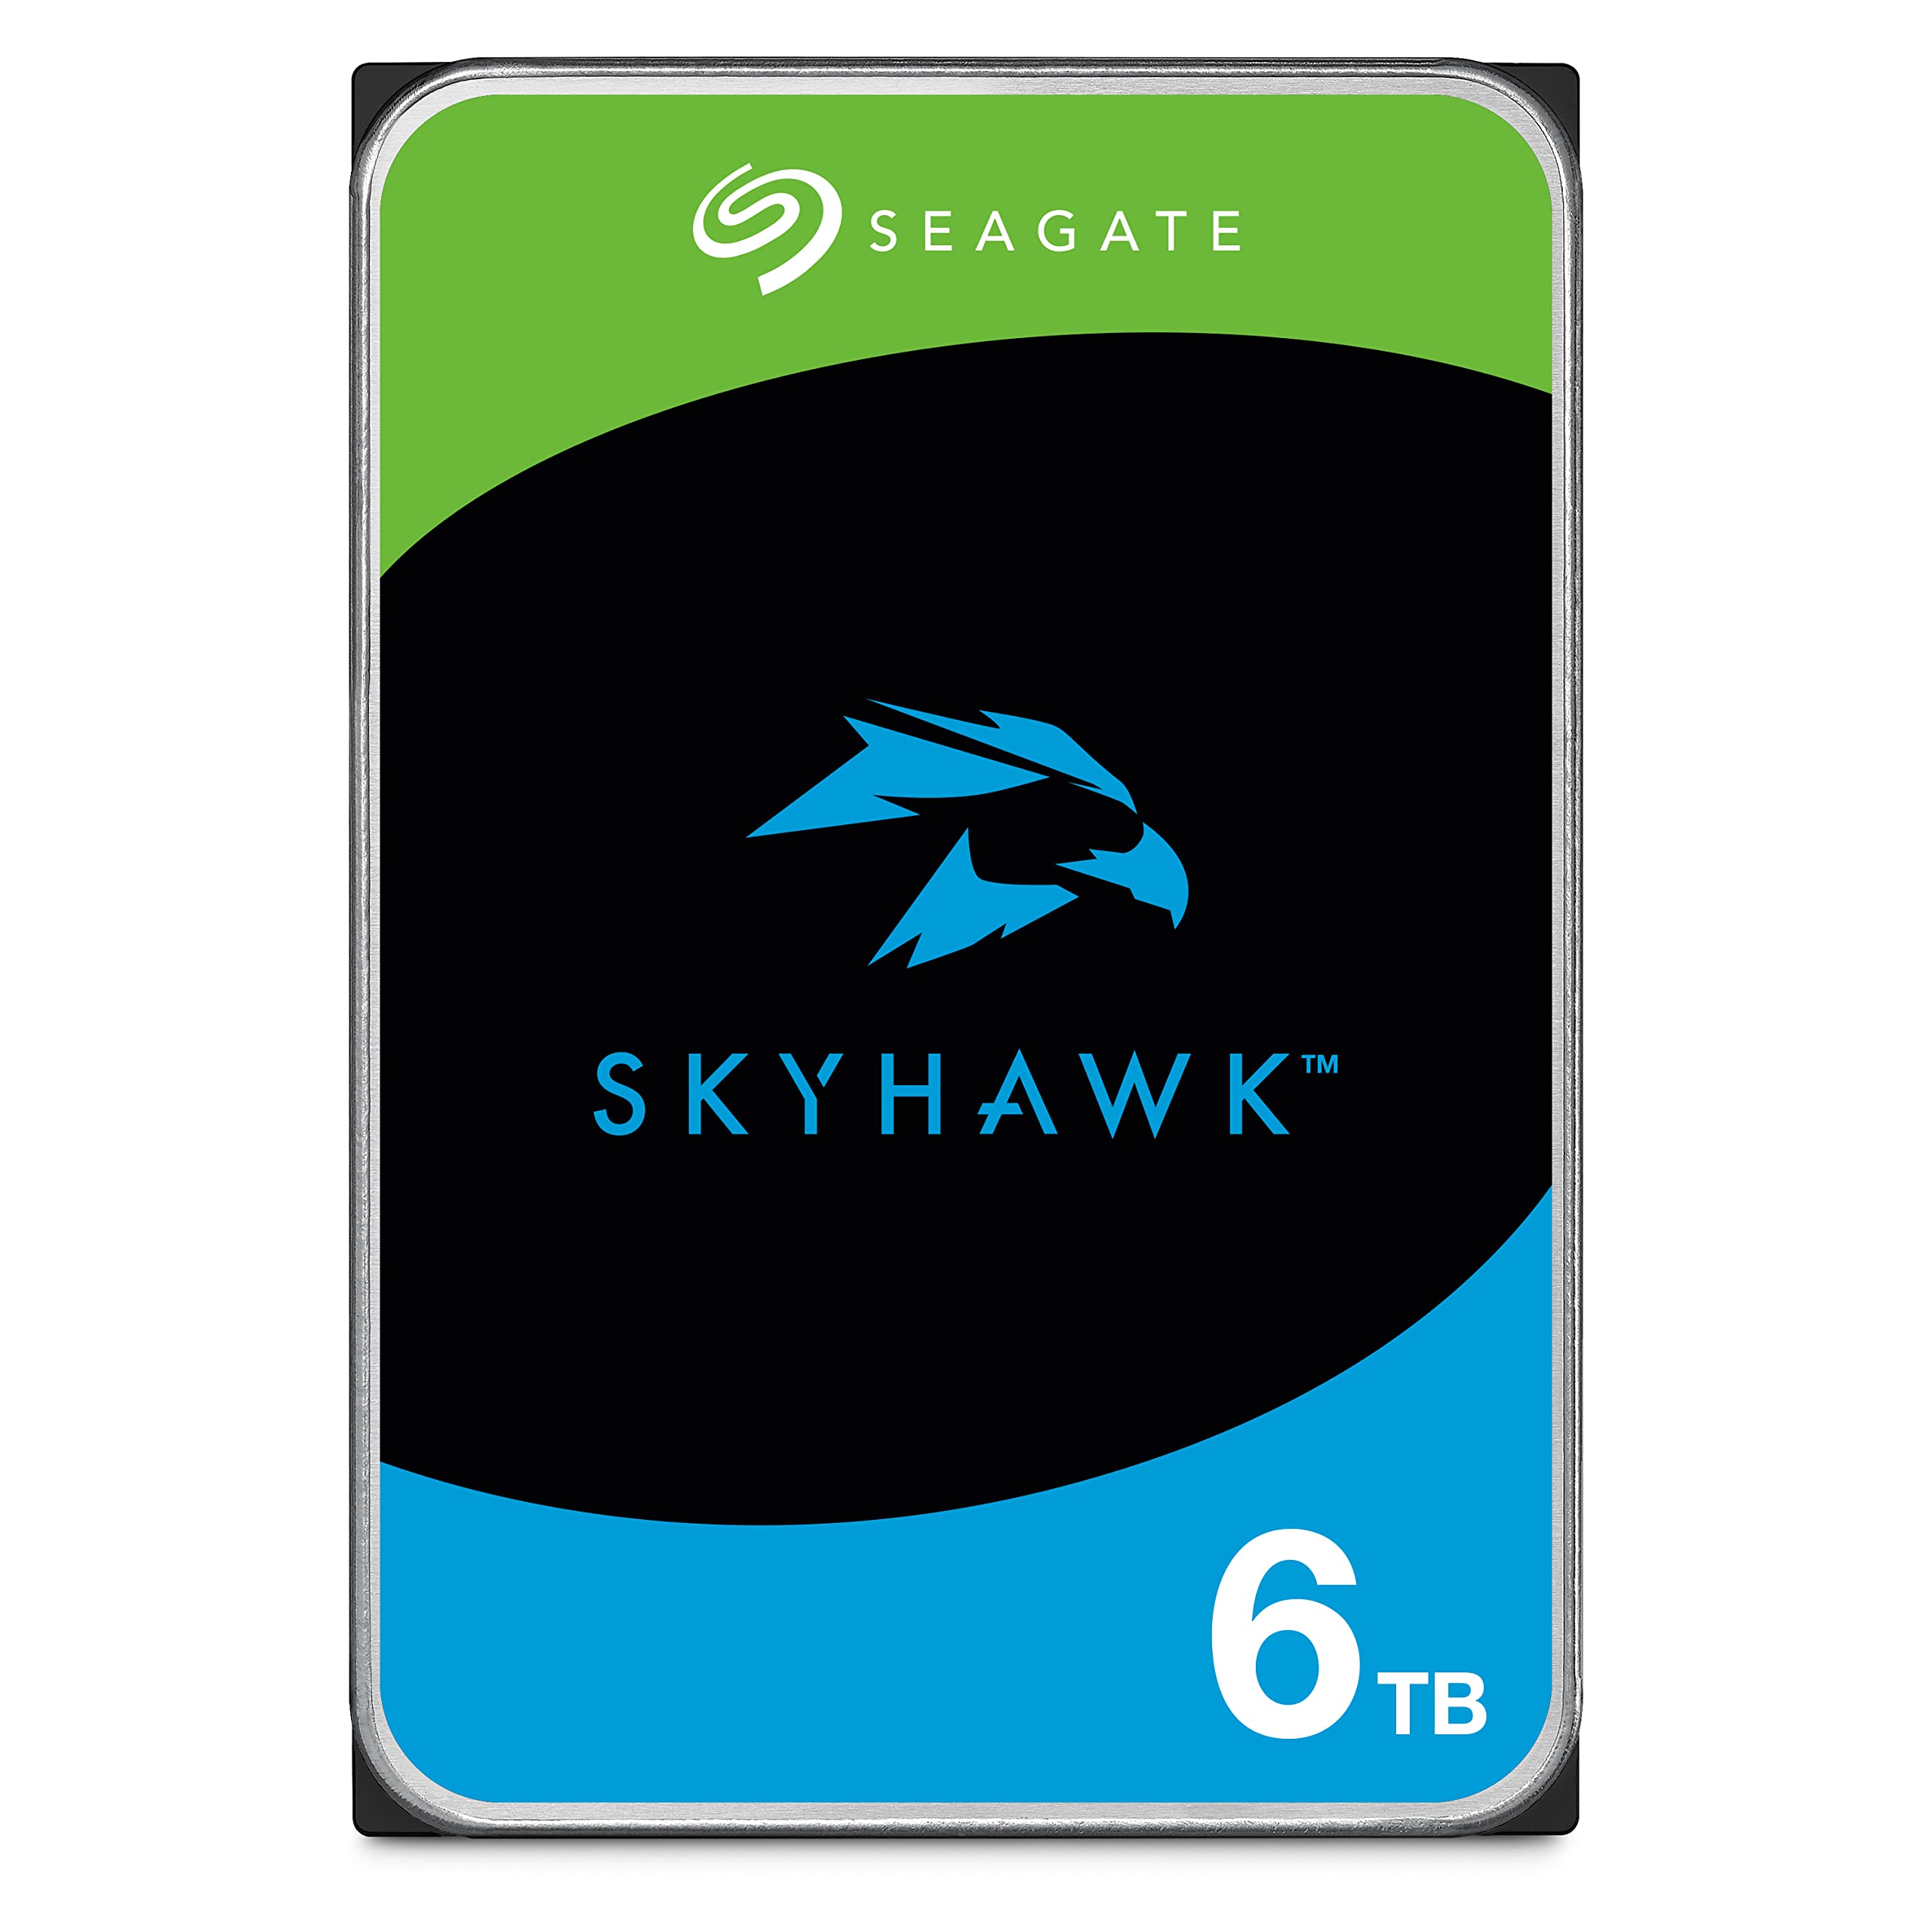 Seagate Skyhawk 6TB Video Internal Hard Drive HDD – 3.5 Inch SATA 6Gb/s 256MB Cache for DVR NVR Security Camera System with in-House Rescue Services – Frustration Free Packaging (ST6000VXZ09)